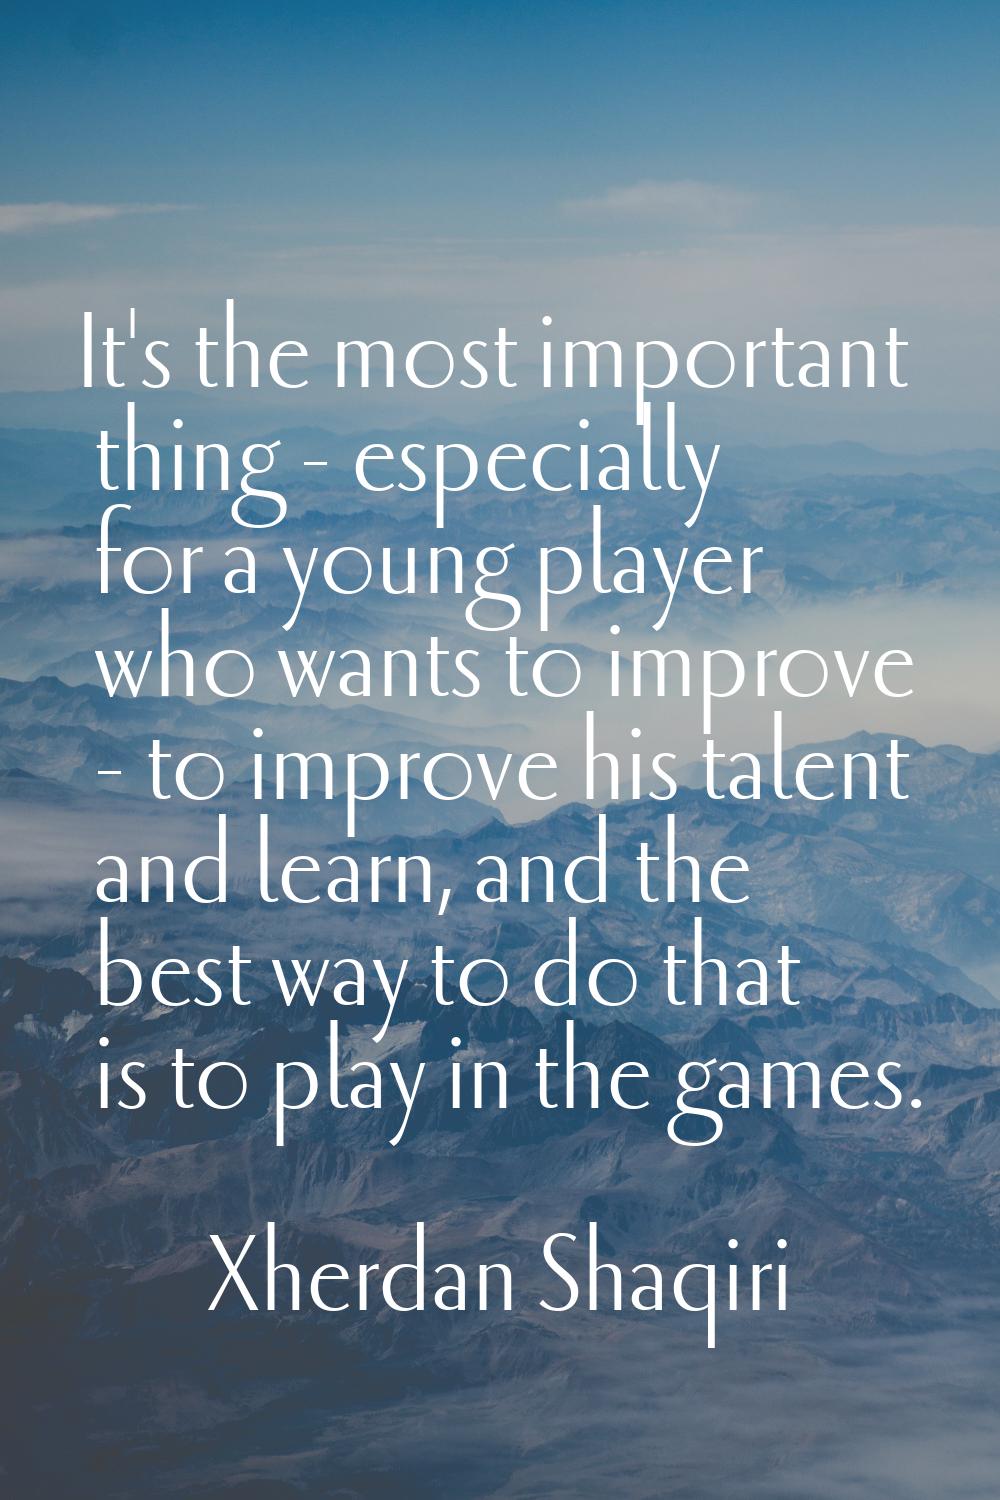 It's the most important thing - especially for a young player who wants to improve - to improve his